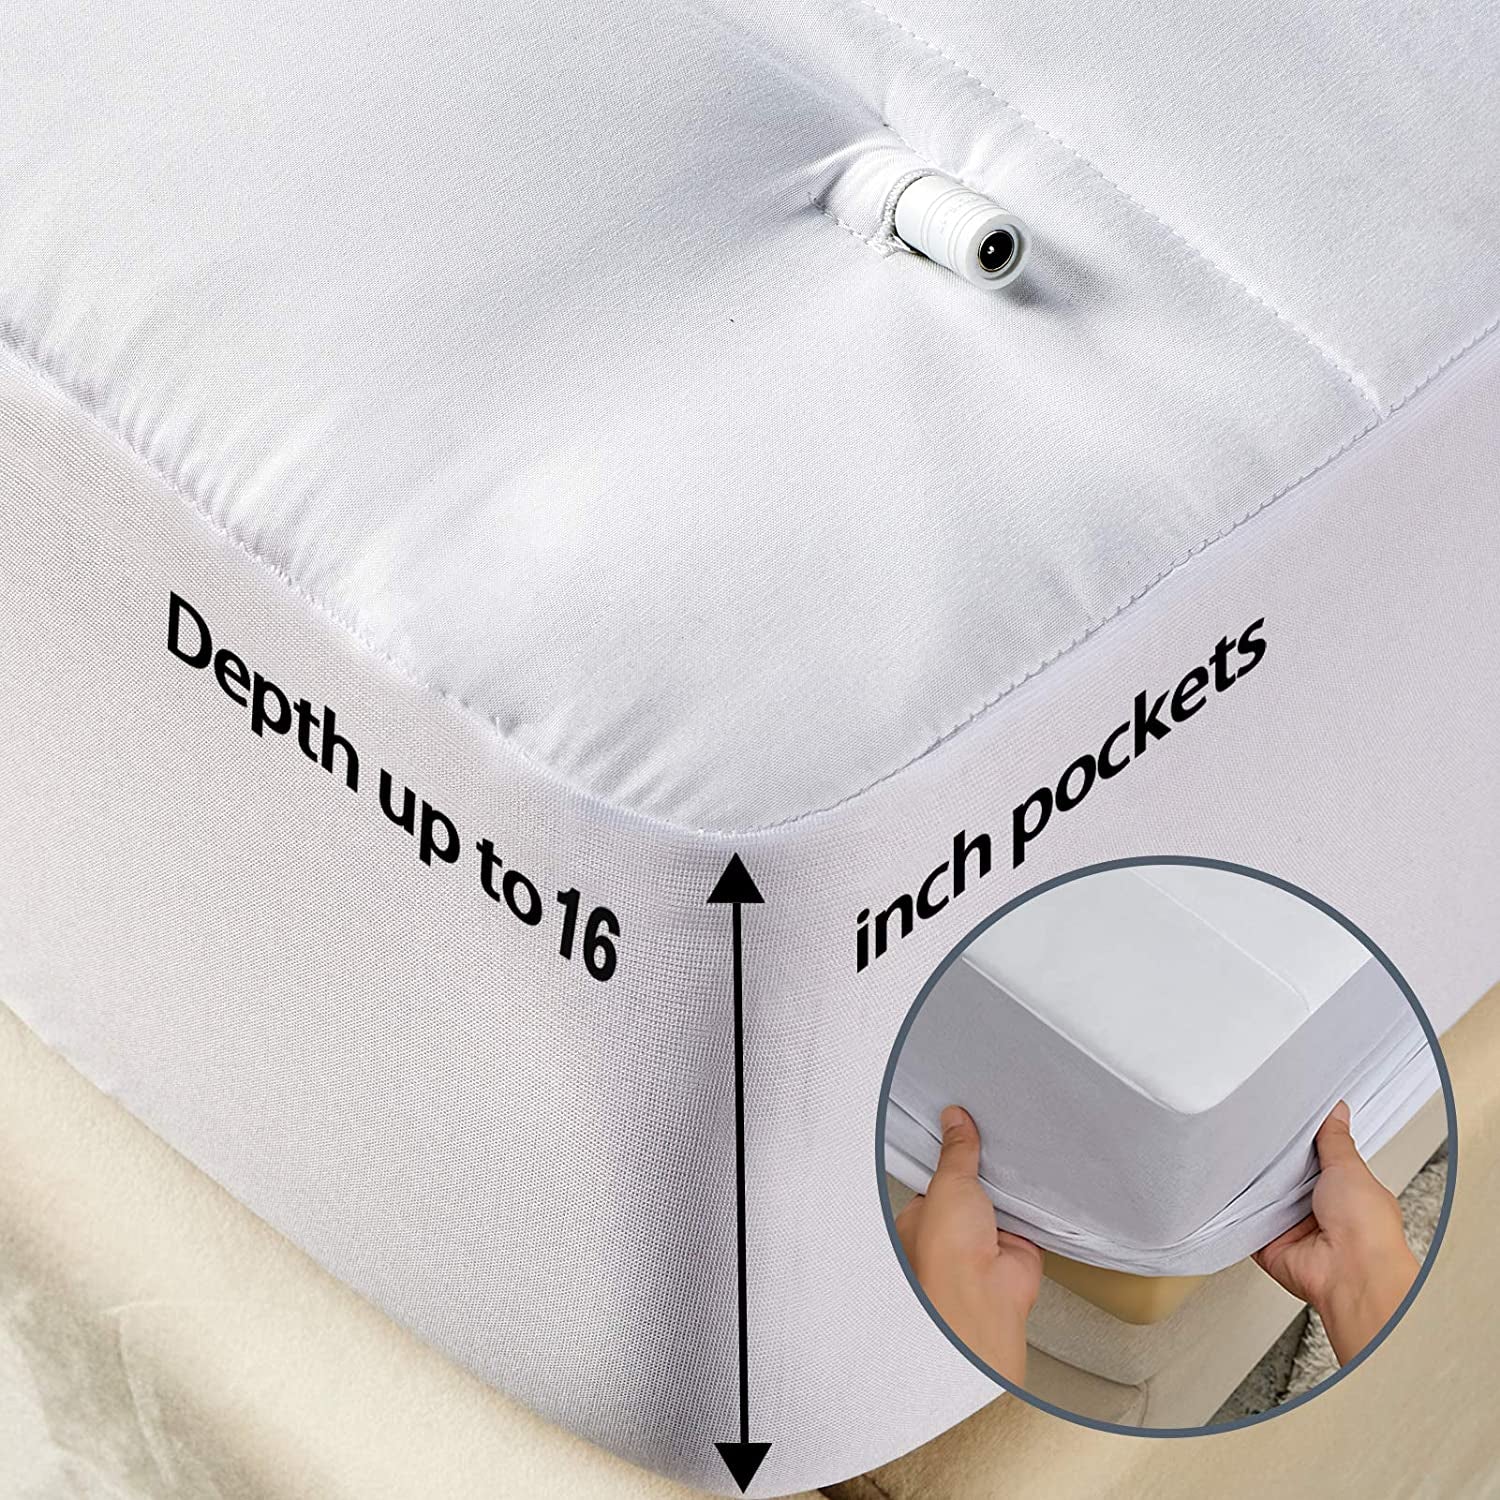 STONECREST Low Voltage Heated Mattress Pad Waterproof, Warm Electric Mattress Topper with Max 8 Hour Auto Shut-Off, Fast Heating, Cord Touchless(16” Deep Pocket, Full Size Foot Area Heated Only)